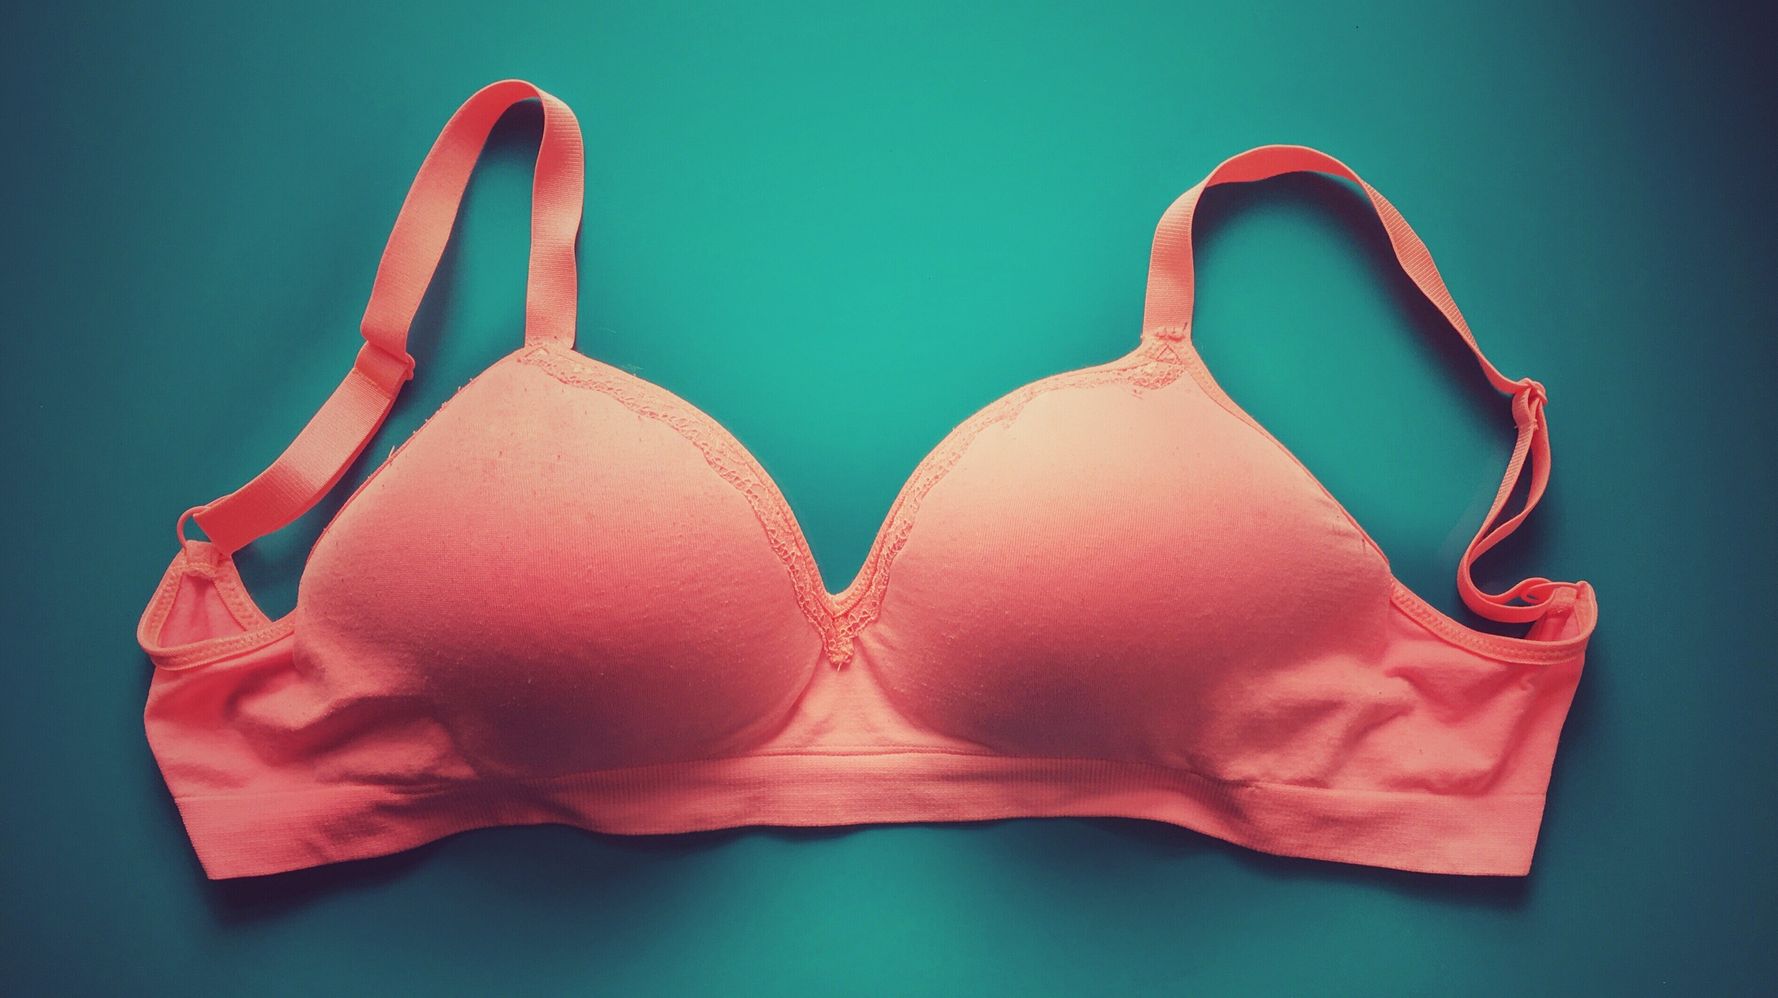 Is Not Wearing A Bra During Self-Isolation A Bad Idea?